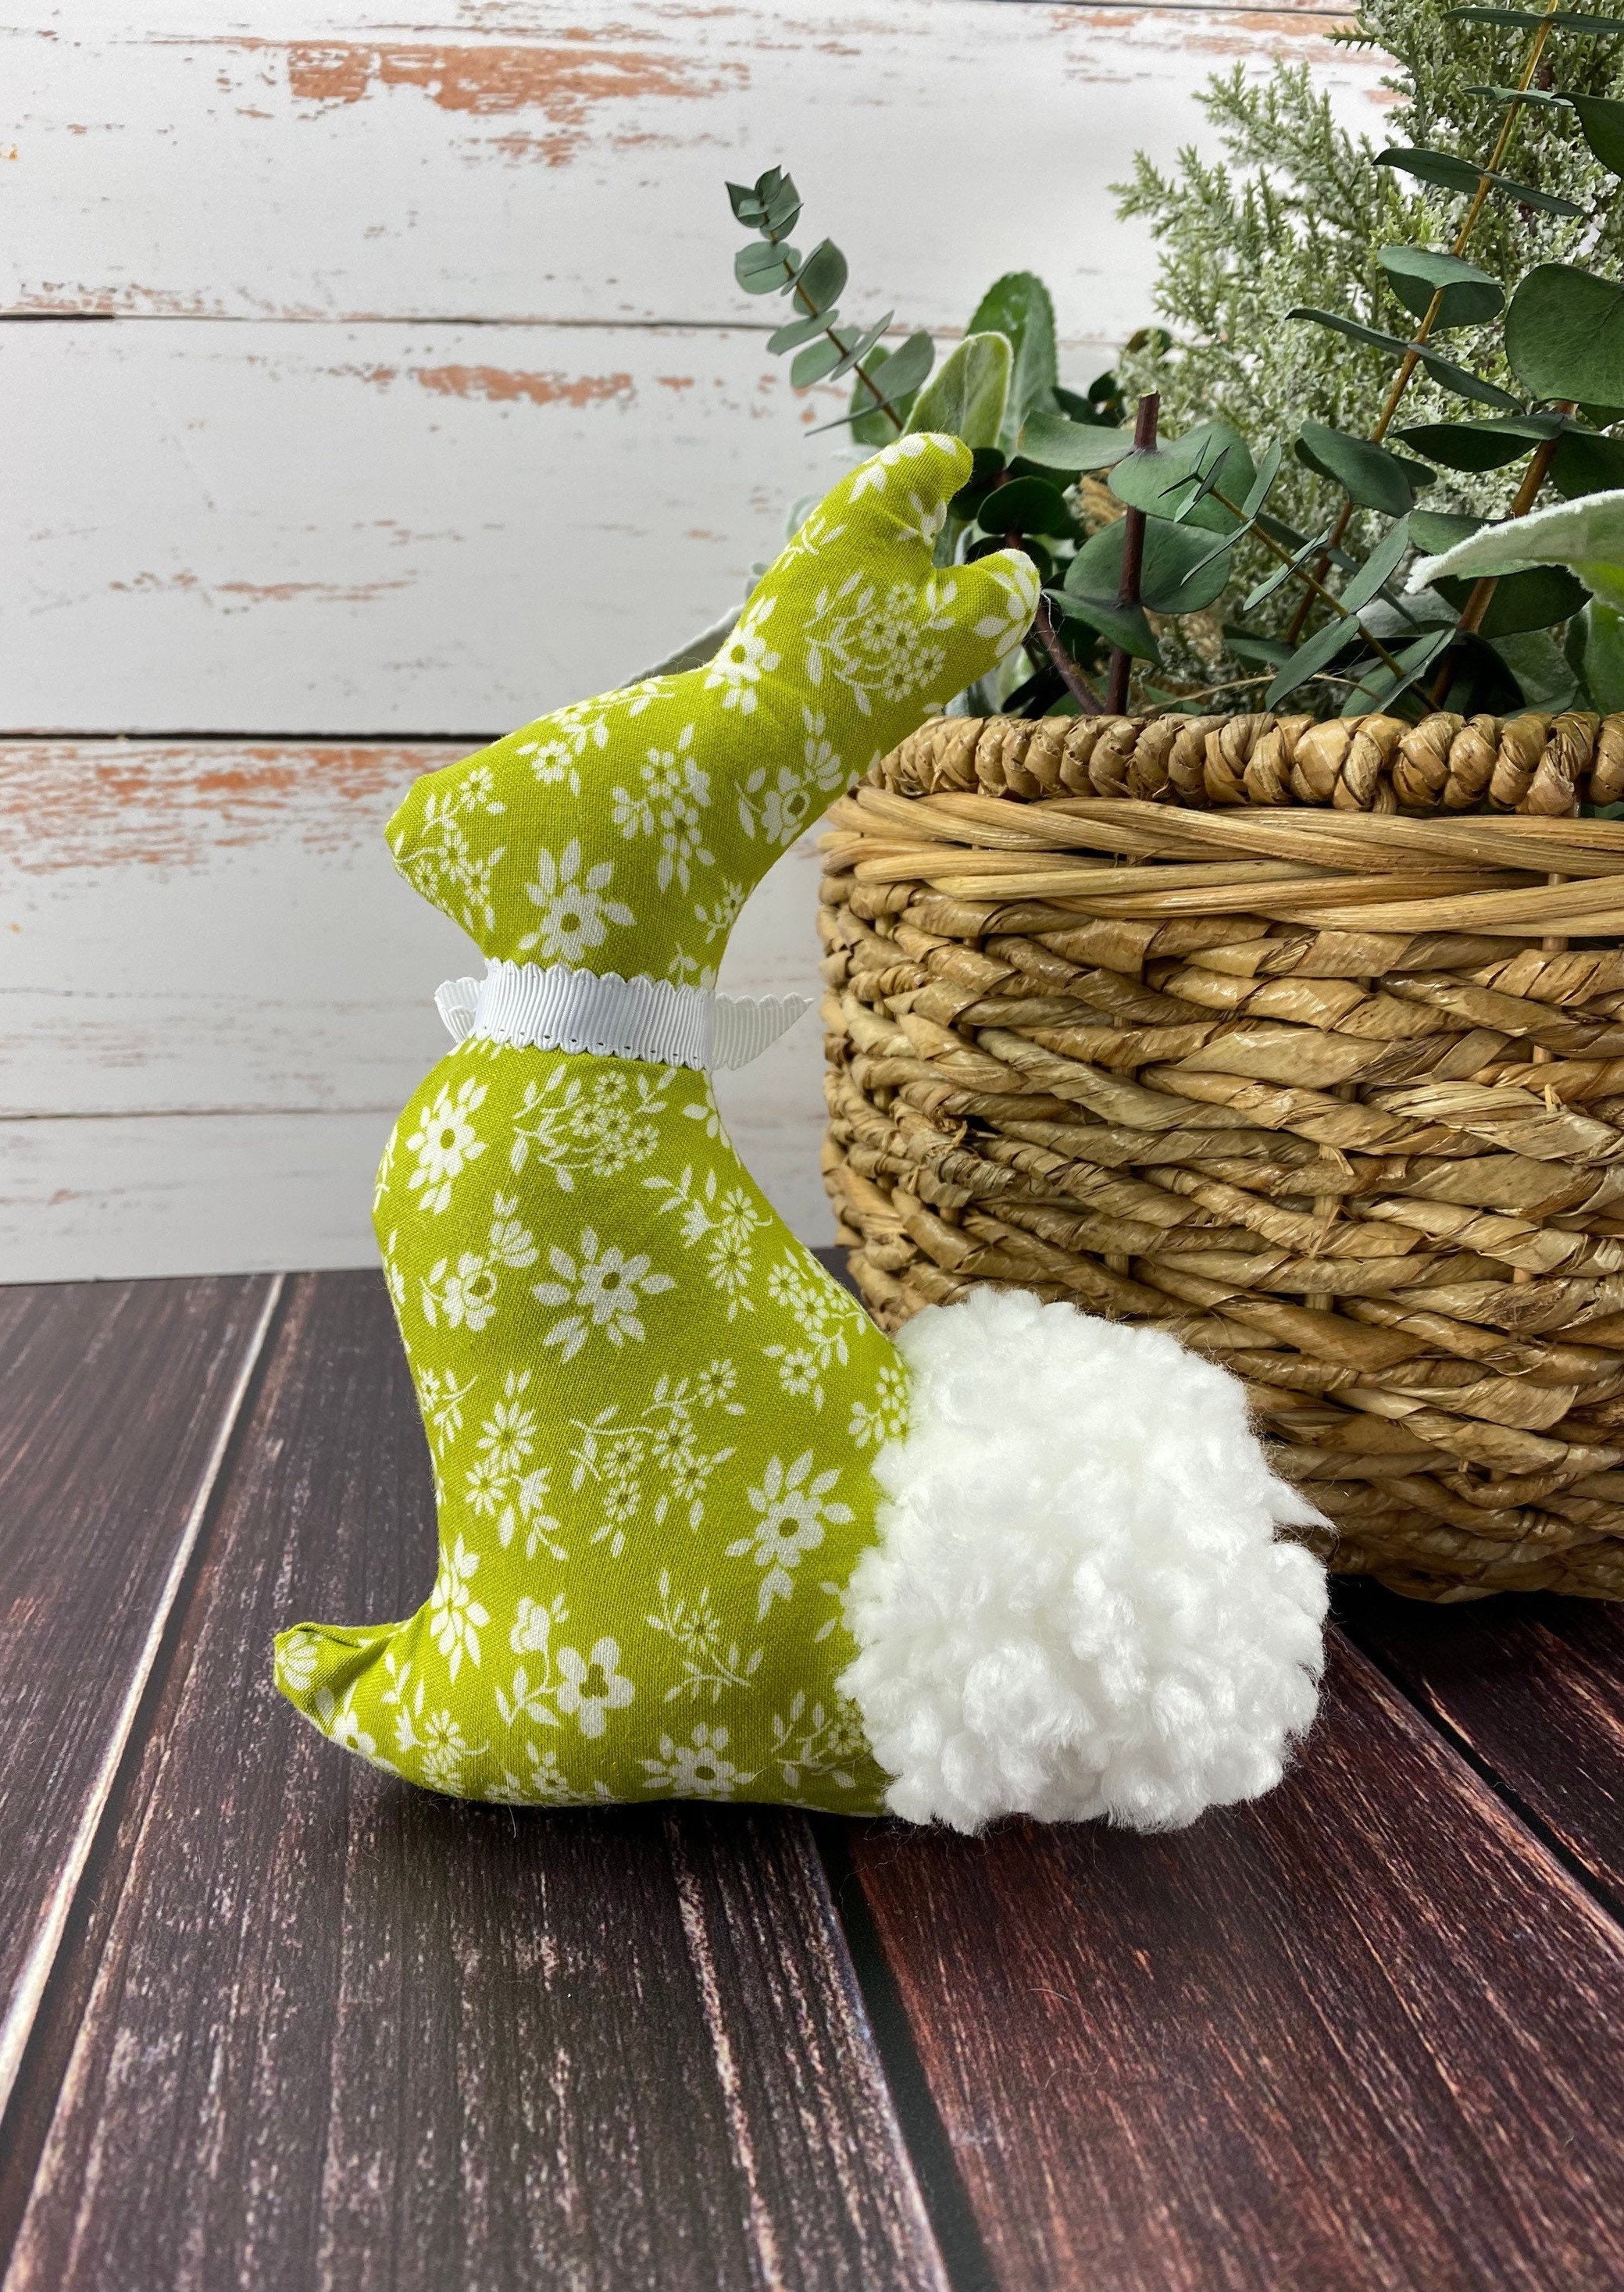 Fabric Stuffed Bunny / Green White Floral Rabbit / Tiered Tray - Etsy